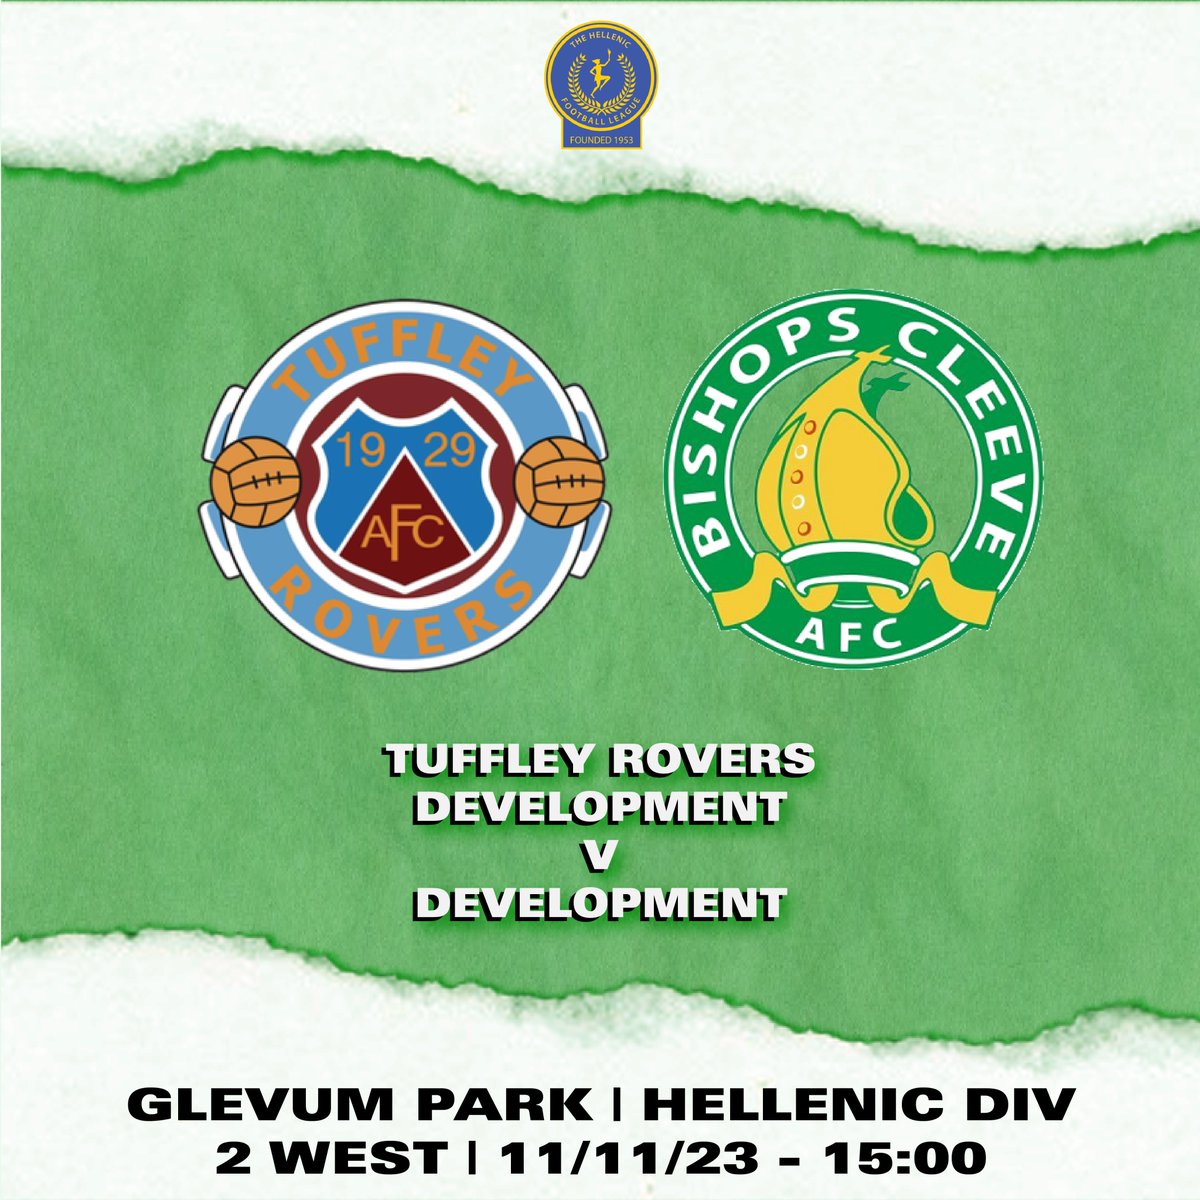 After a hard fought 1-0 win over Tuffley Rovers Development in the cup last week, we're off to Glevum Park in league action tomorrow! 

📈 3rd v 5th
🏆 Hellenic Division Two West 
📍 Glevum Park, GL2 5DE

 🟢⚪️ | #Mitres | #CleeveDev